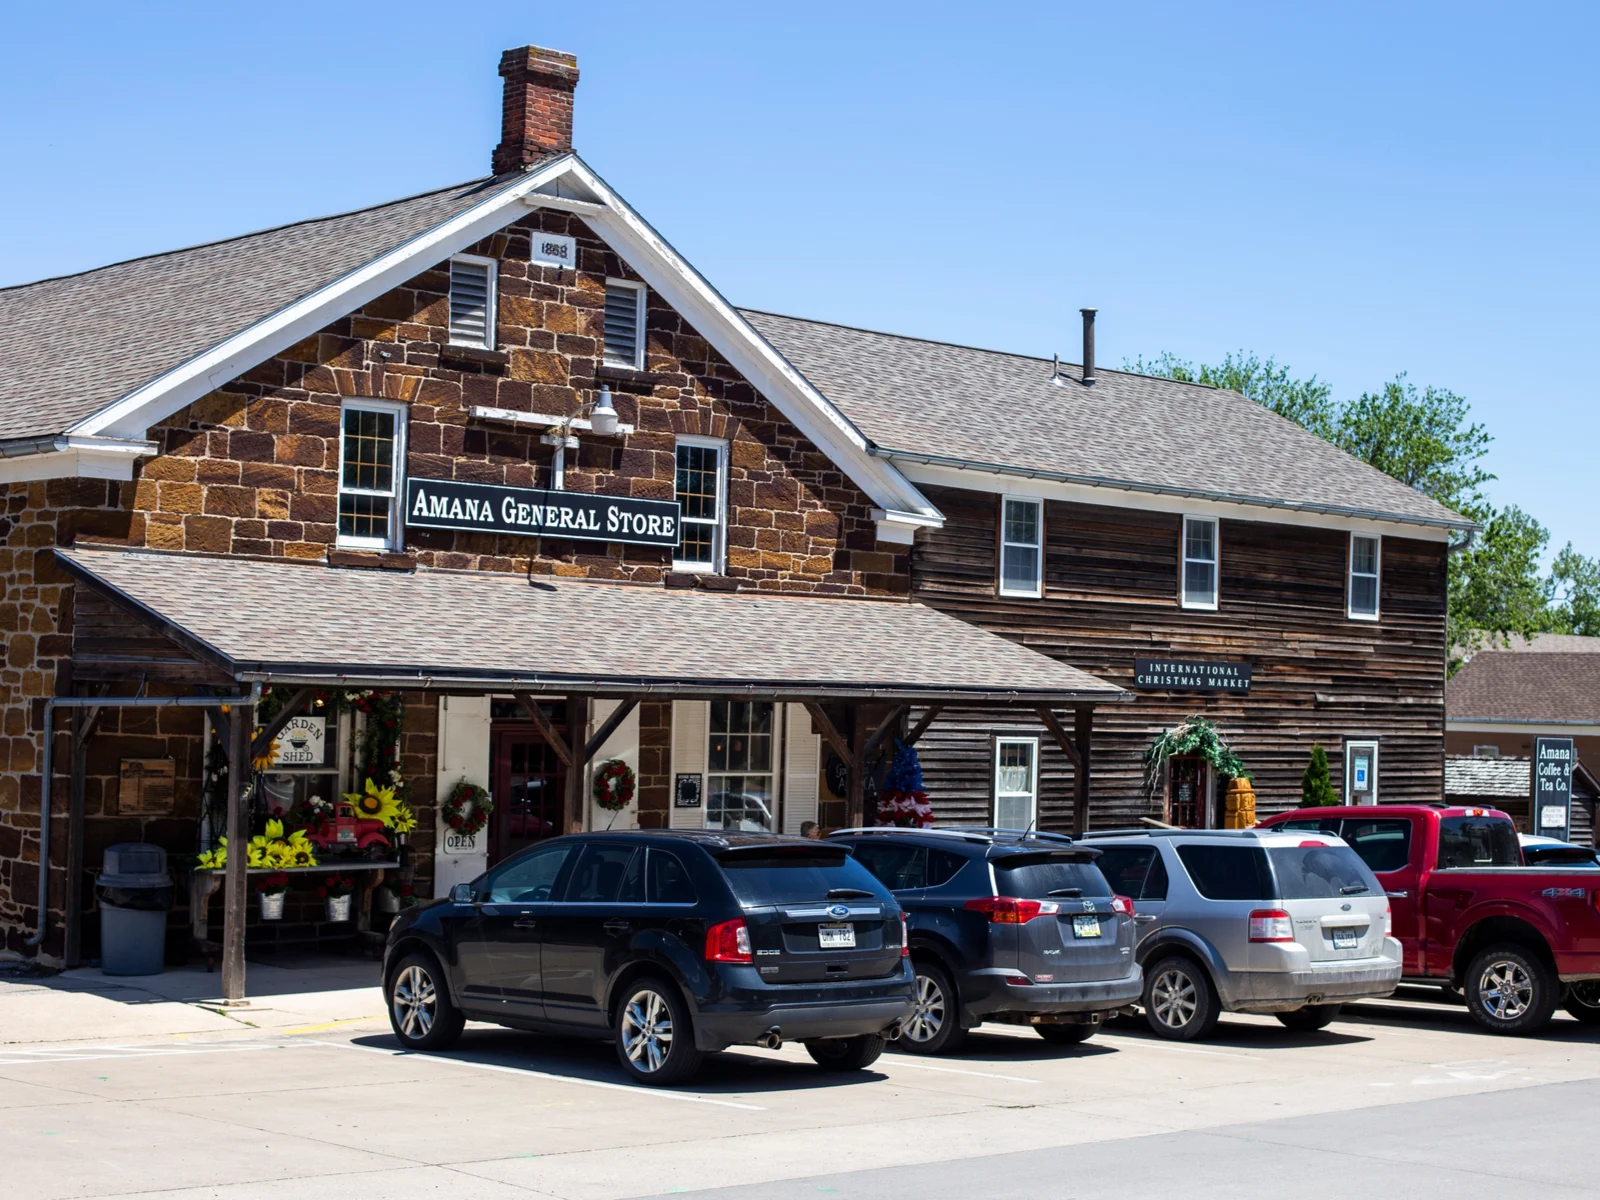 A pick for what to see in Iowa, the classic Amana General Store at the Amana Colonies with cars parked in front